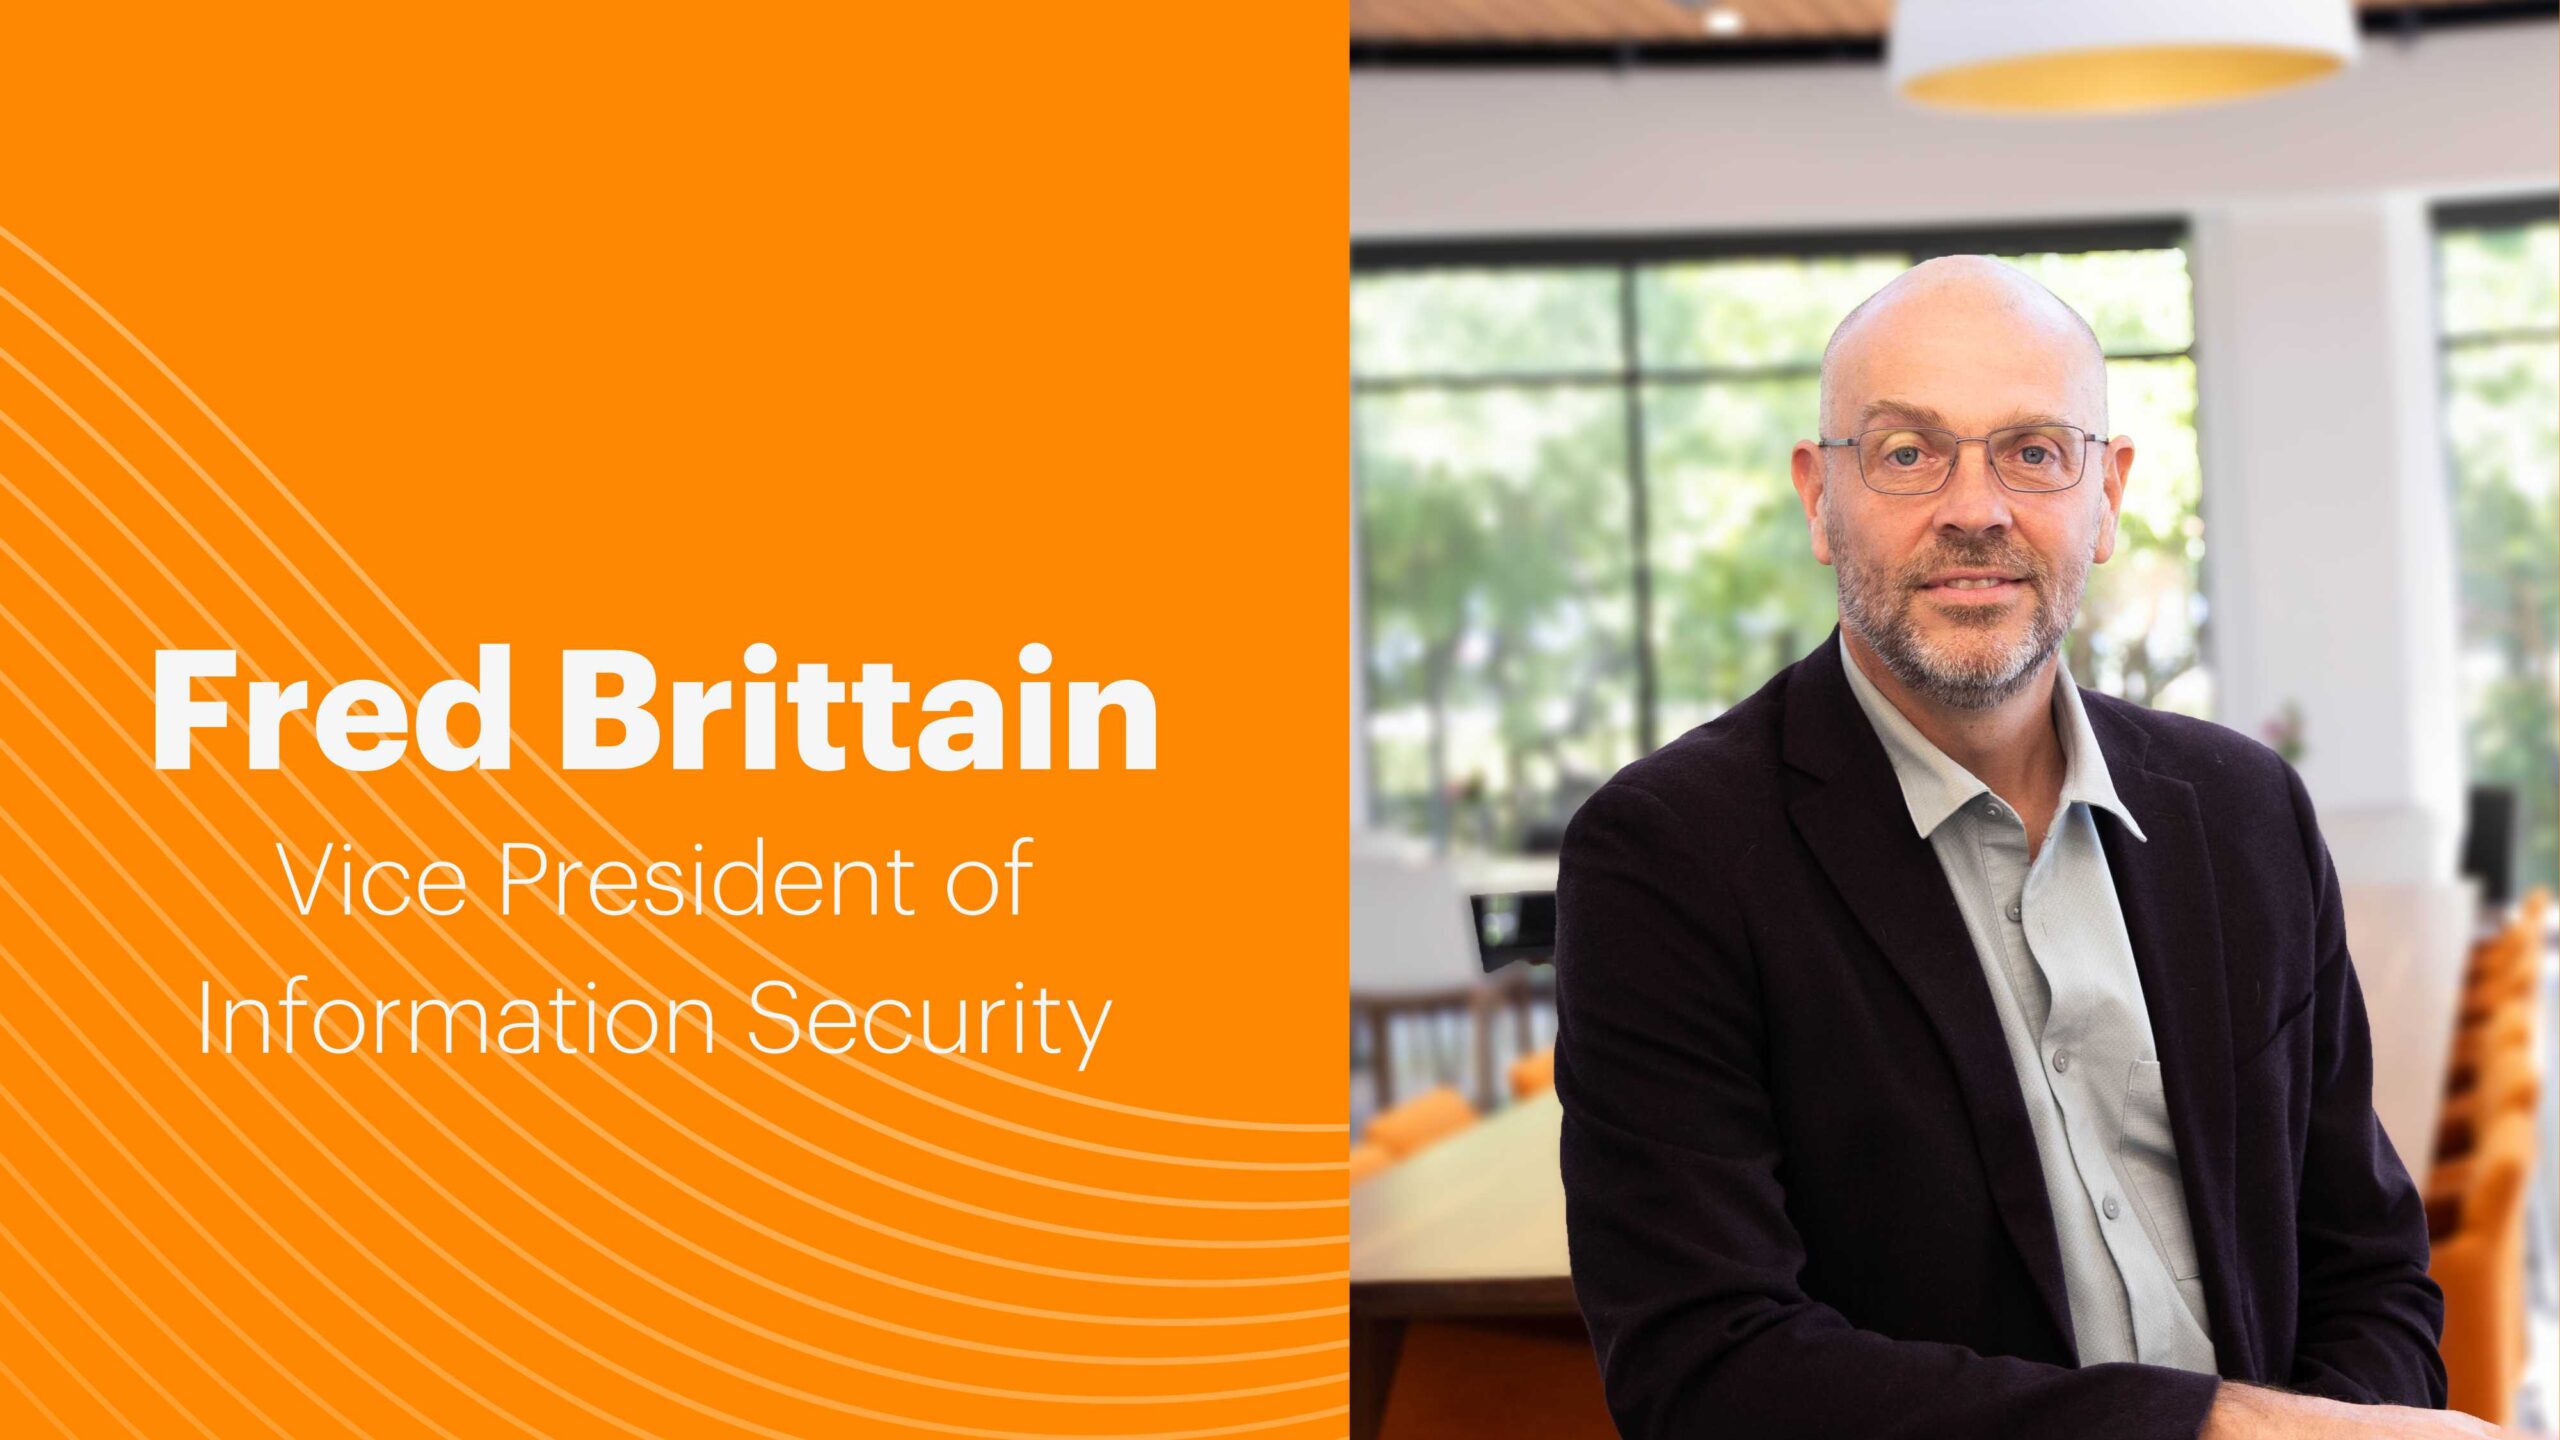 Fred Brittain, Vice President of Information Security